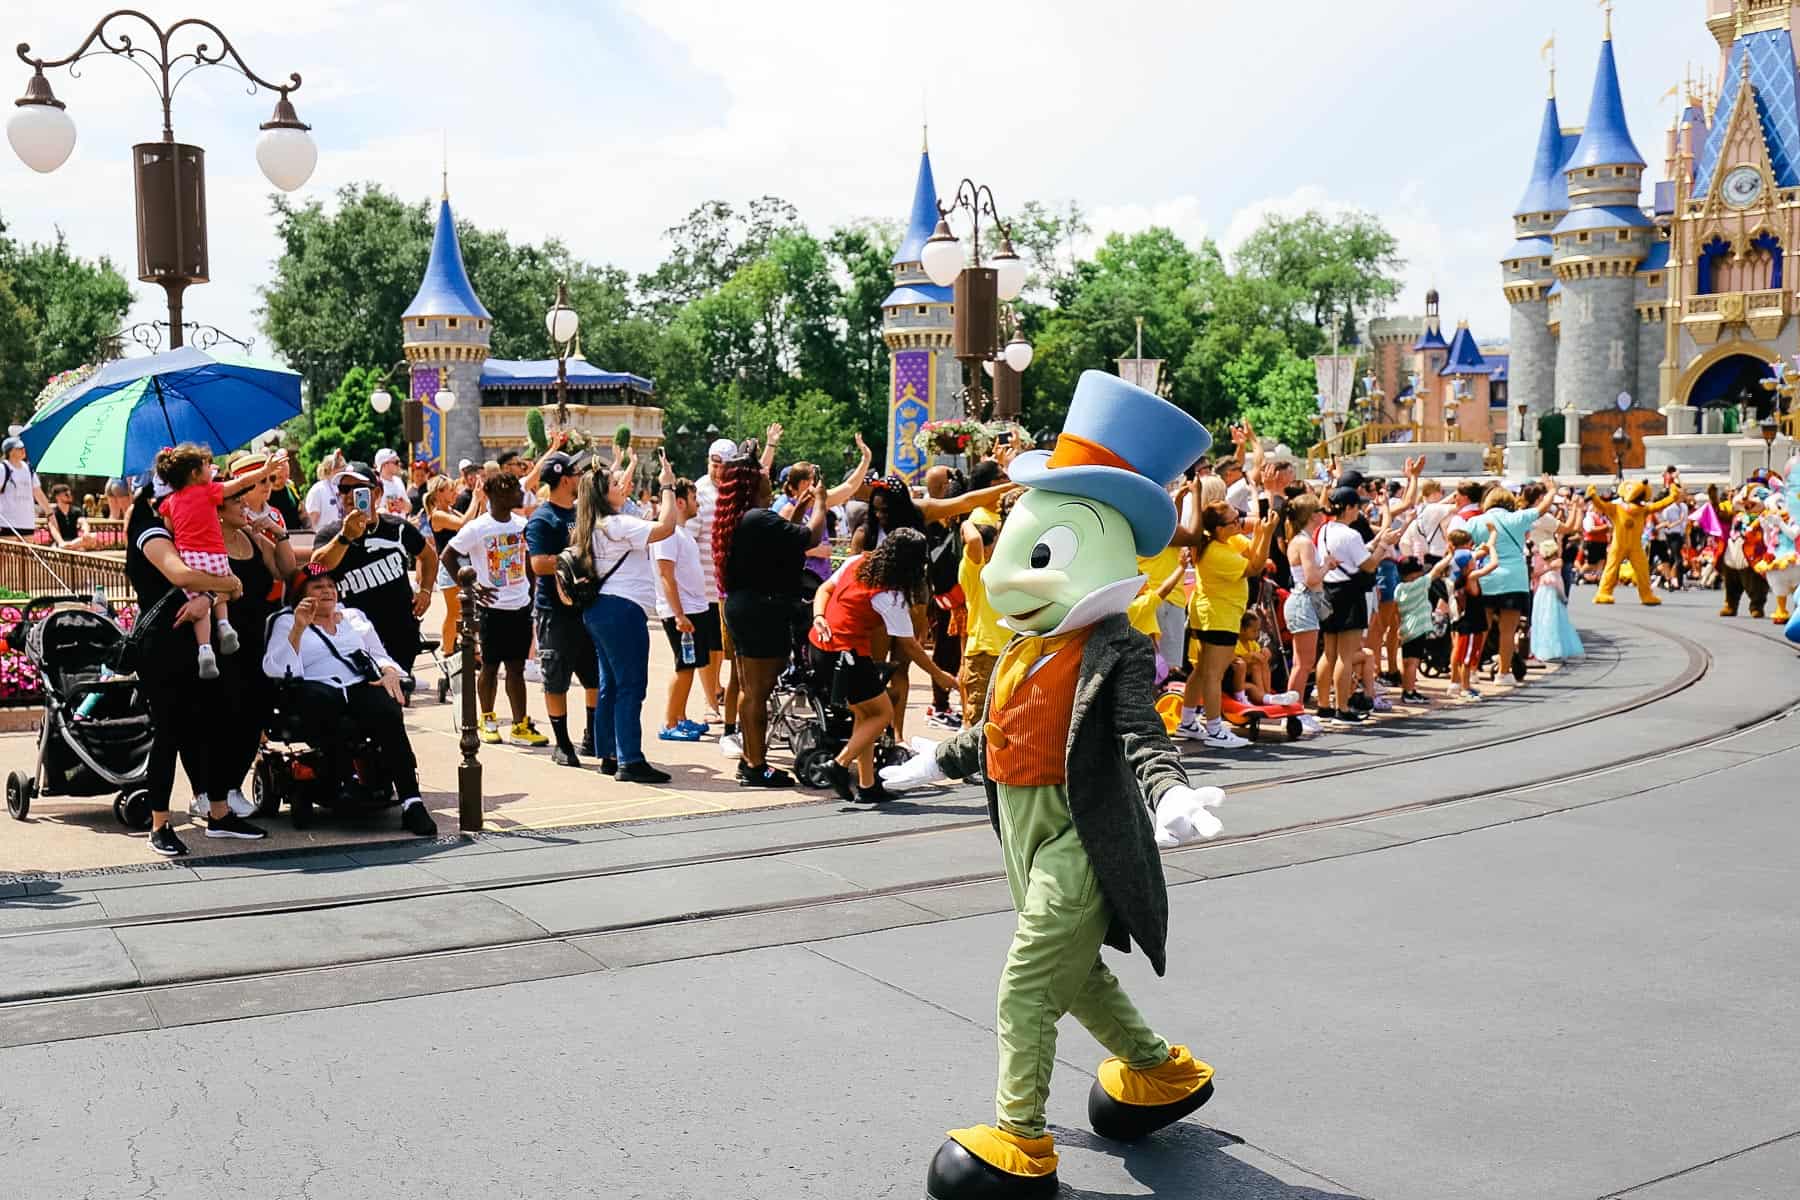 Jiminy Cricket is a walking character in the parade.